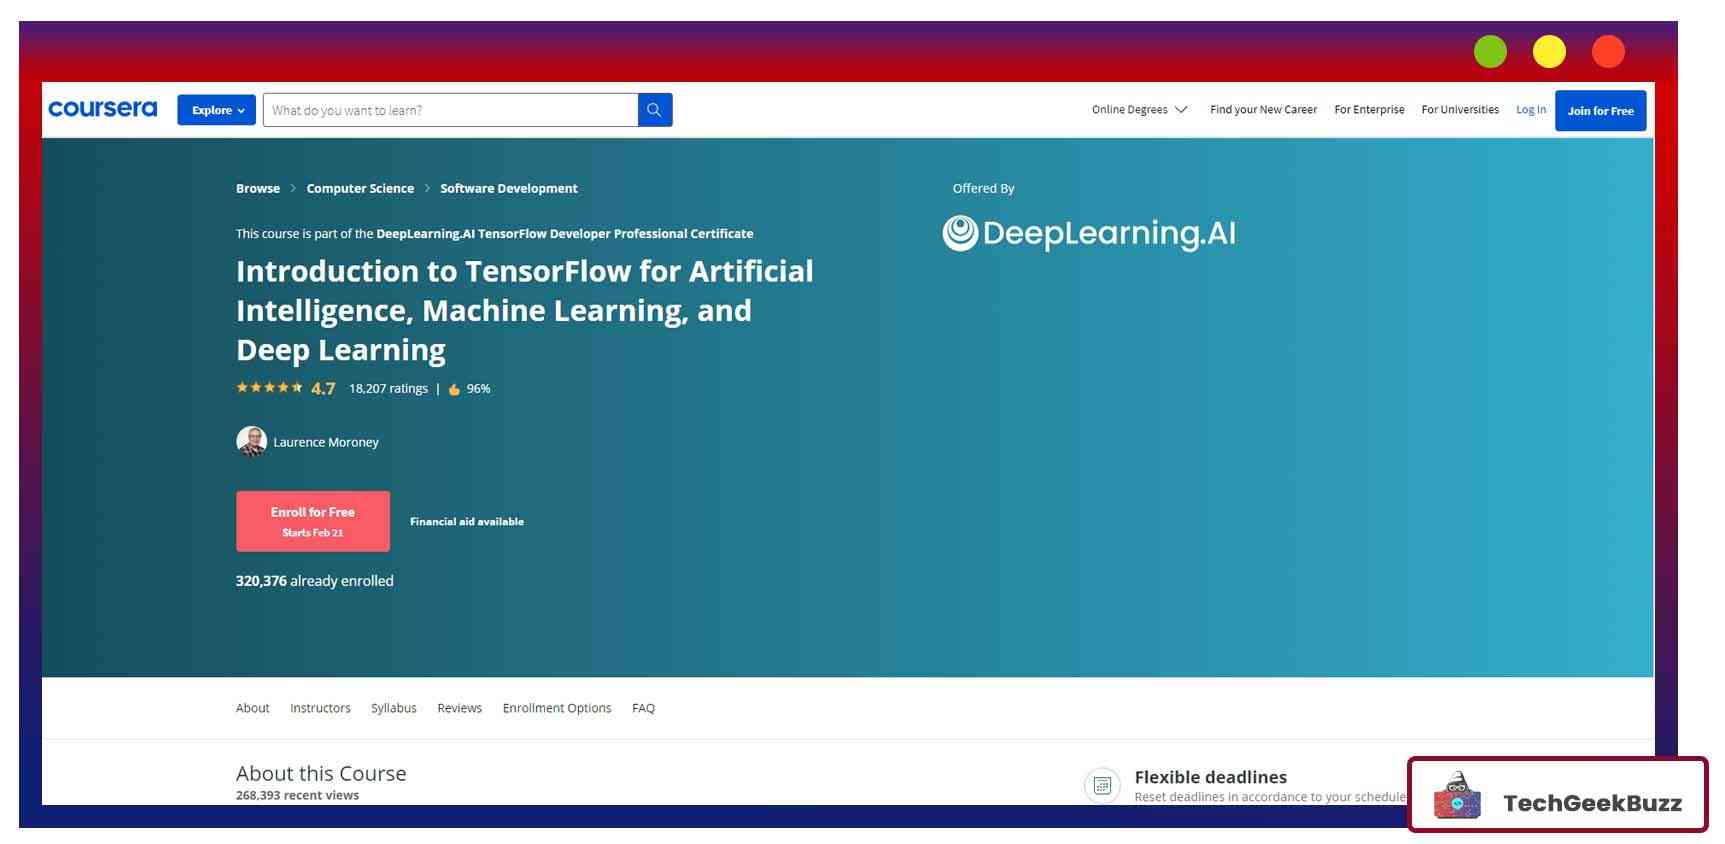 Introduction to TensorFlow for Artificial Intelligence, Machine Learning, and Deep Learning